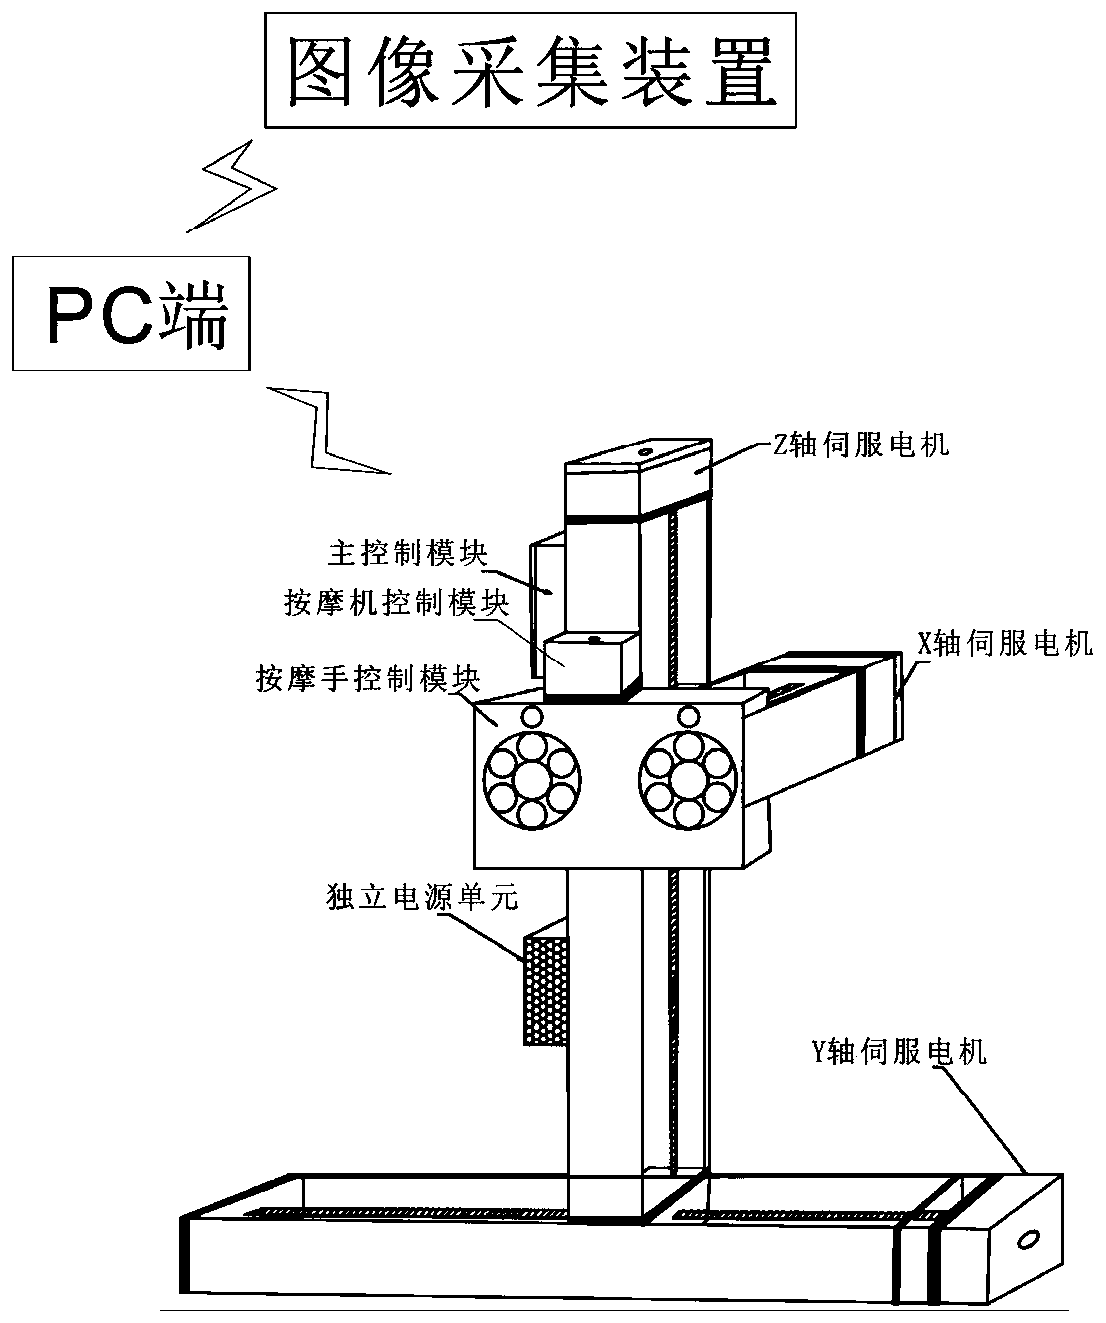 Motion control system for original point intelligent massaging equipment and control method of motion control system